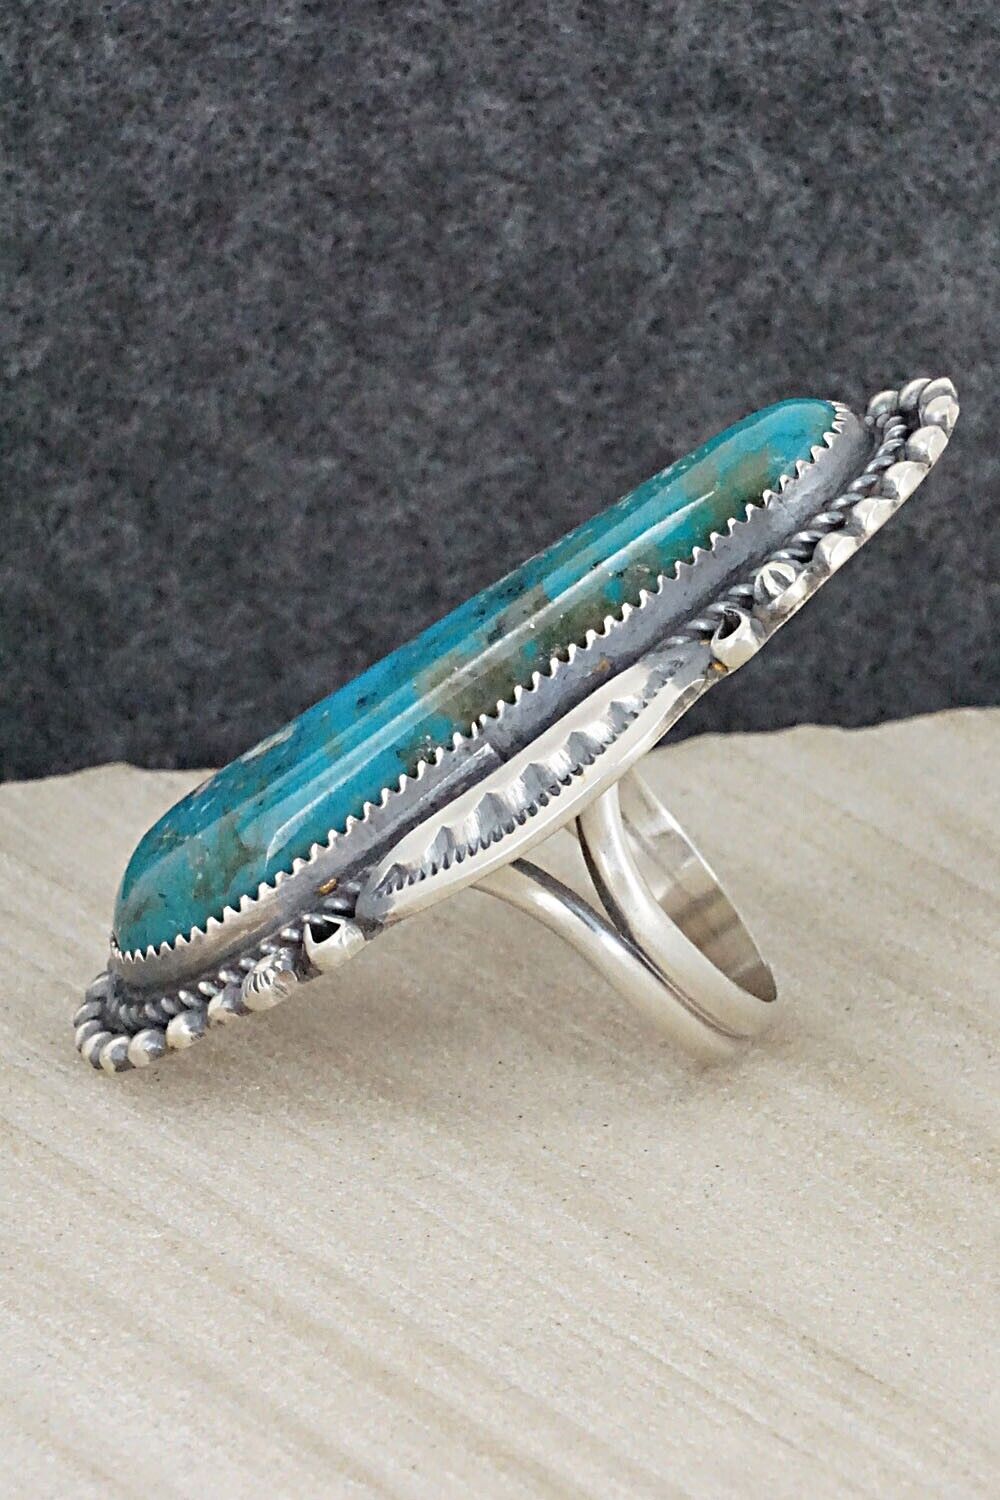 Turquoise & Sterling Silver Ring - Leslie Nez - Size 10.25